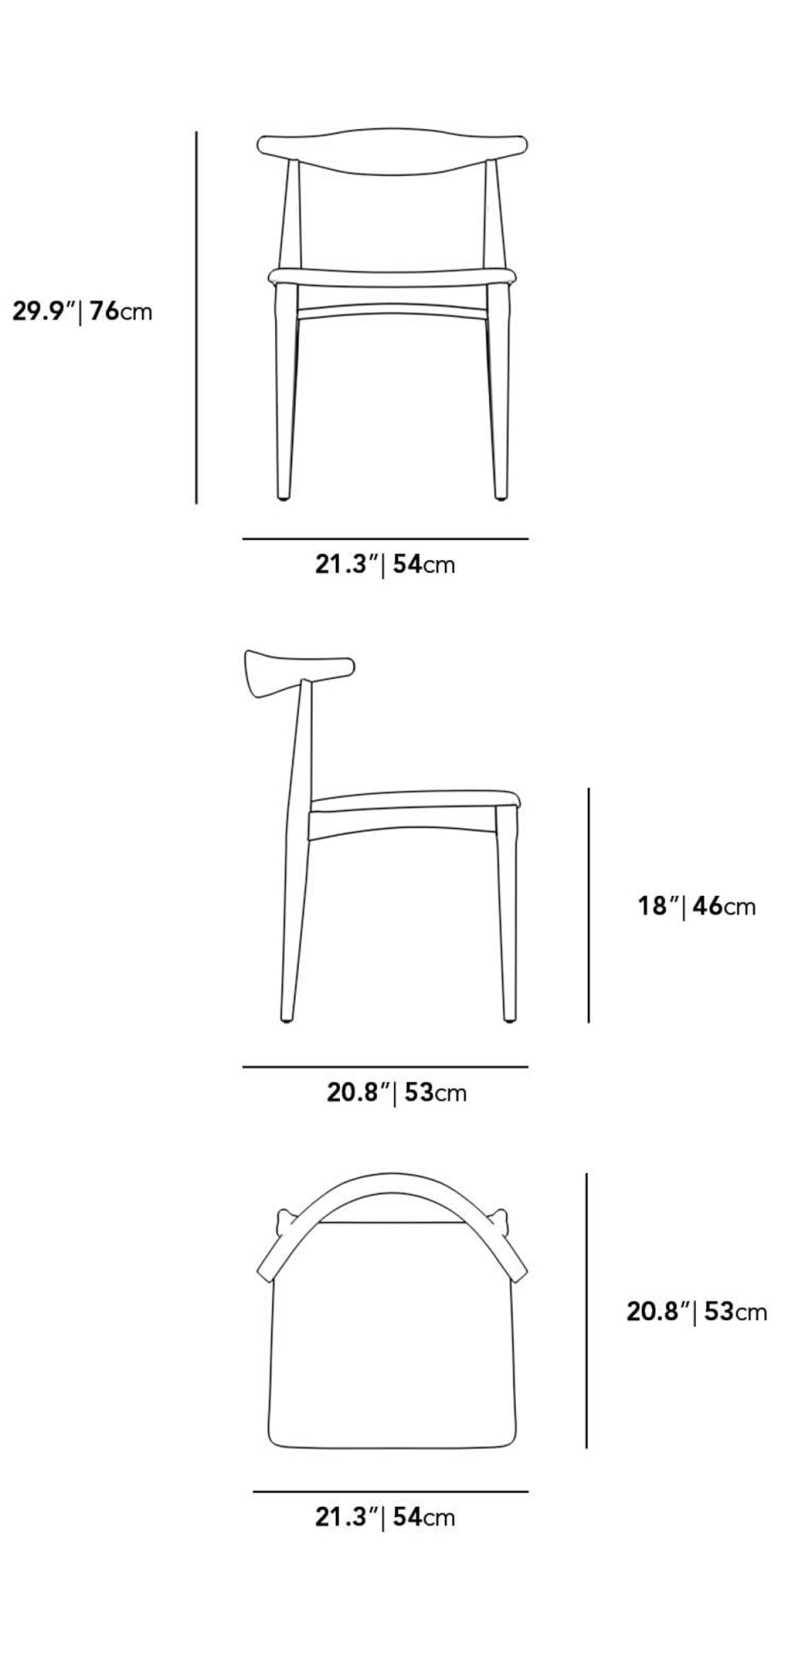 Dimensions for Elbow Chair